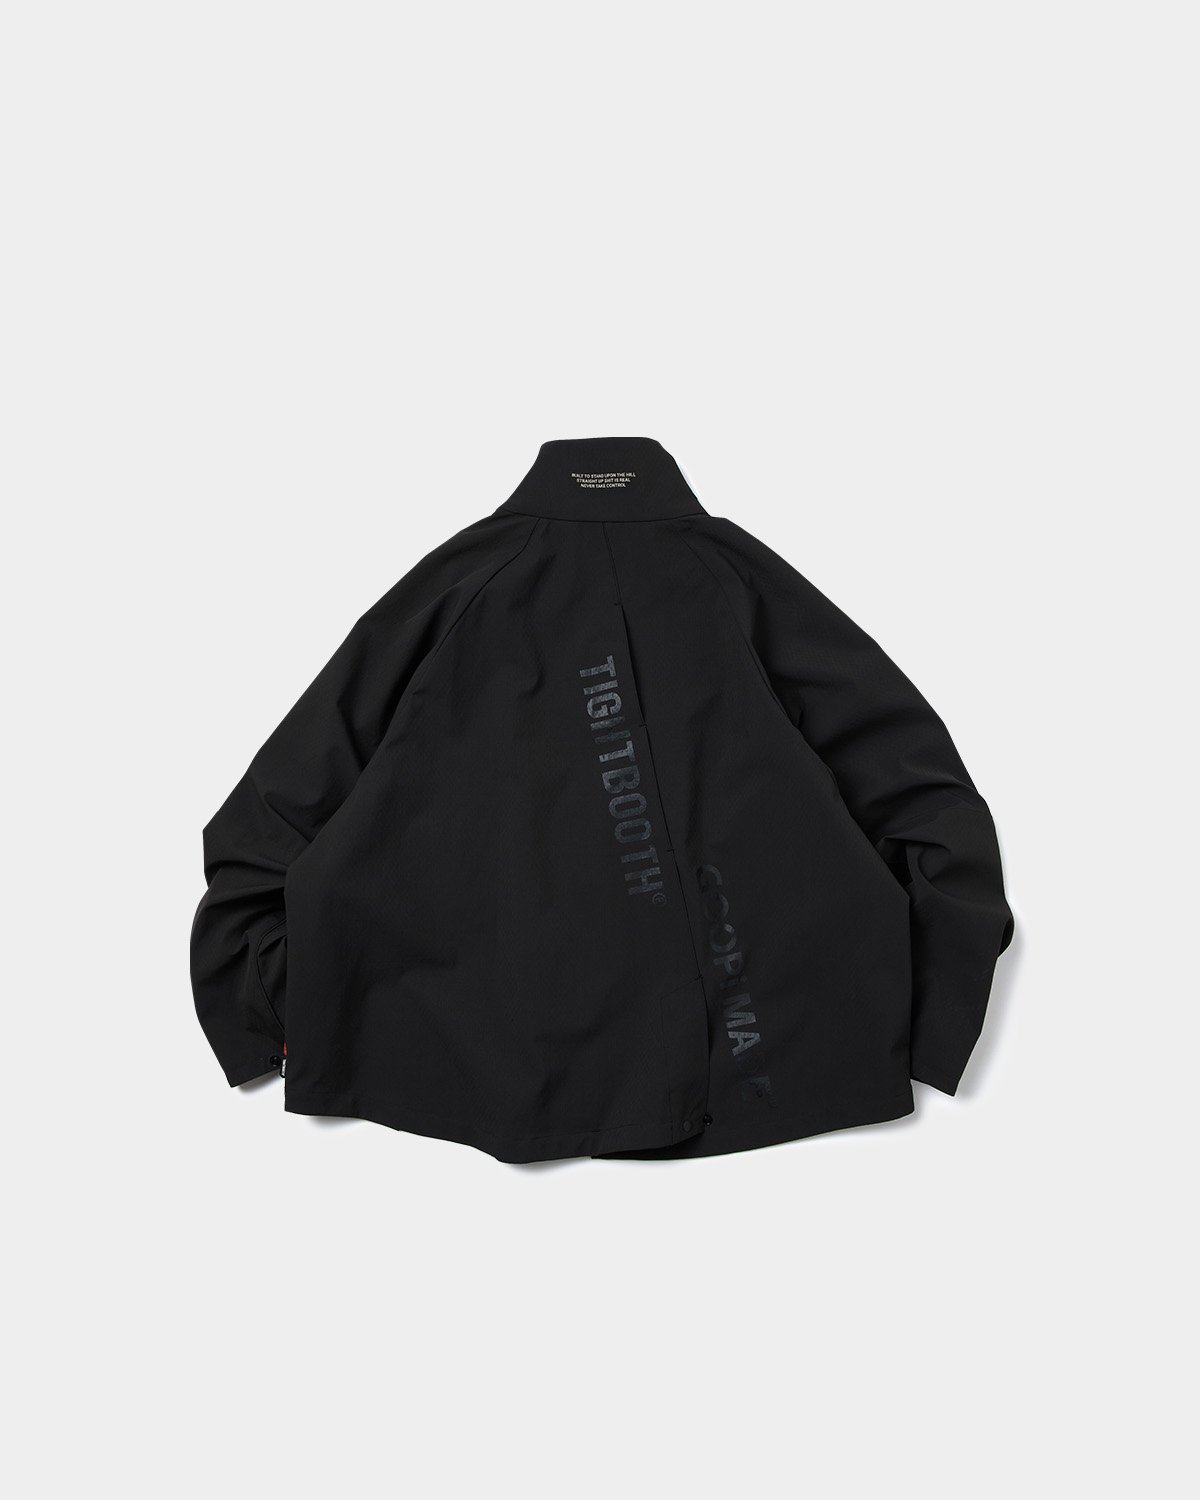 3D Cutting Shield Jacket（GOOPiMADE x TIGHTBOOTH） - TIGHTBOOTH